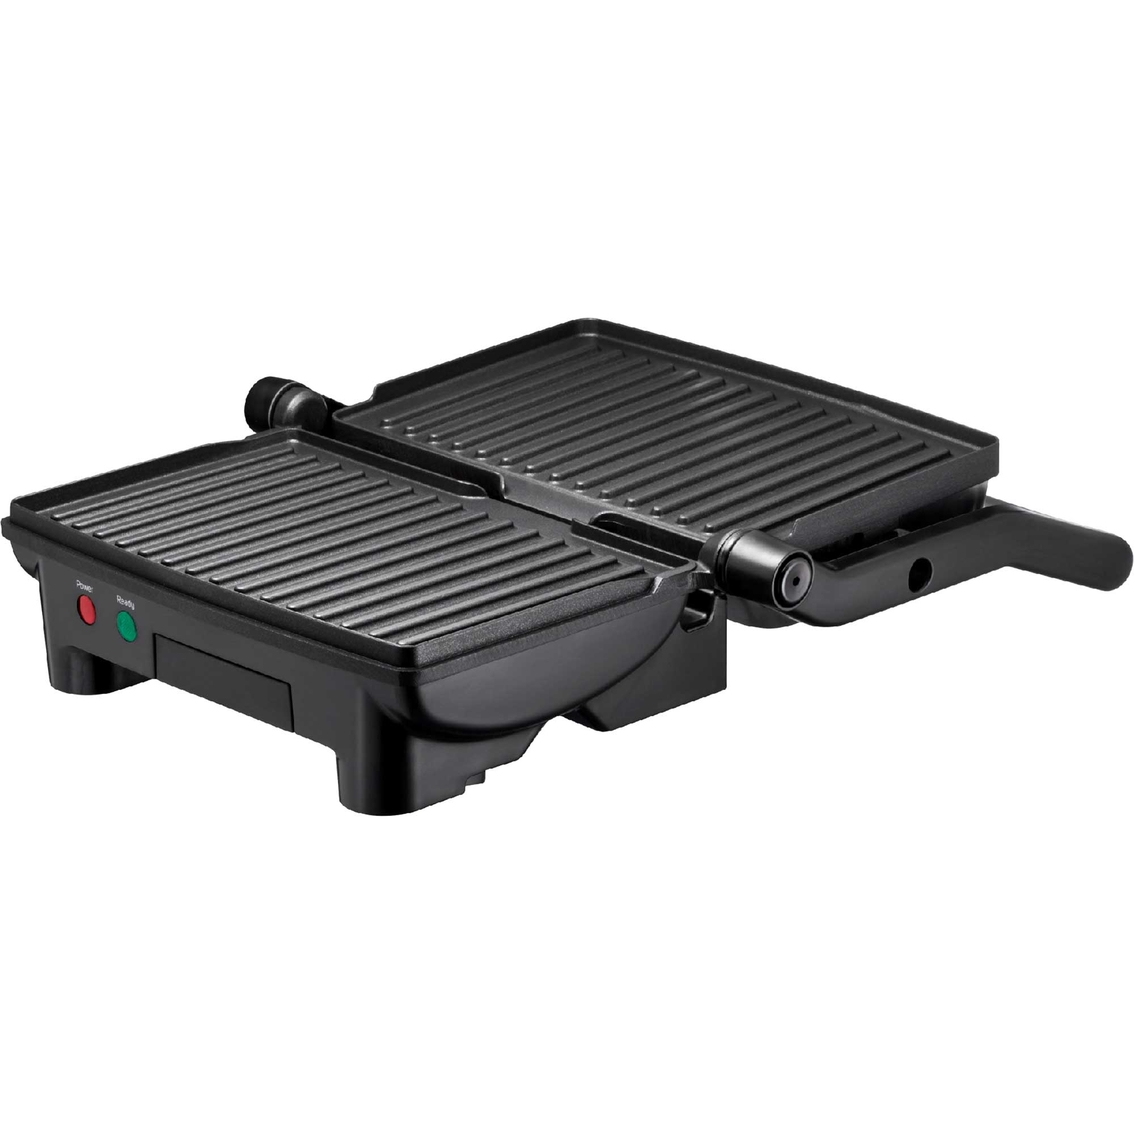 Chefman Panini Press Grill and Gourmet Sandwich Maker - Image 3 of 9